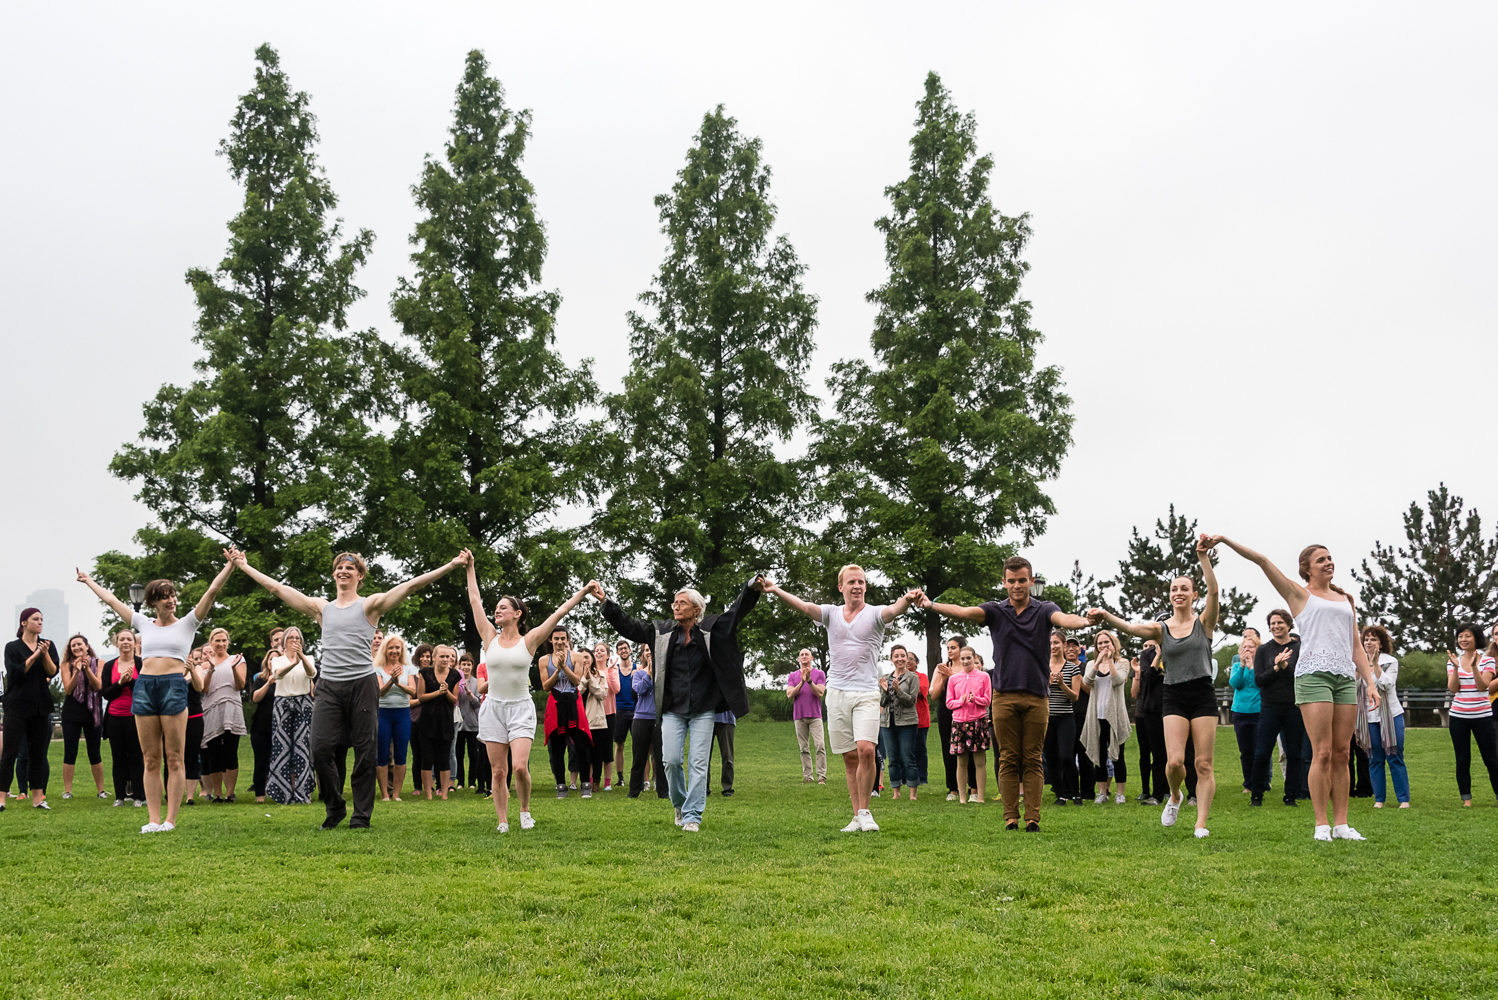 River To River Festival 2015, The One Hundreds by Twyla Tharp. Photo credit: Darial Sneed.